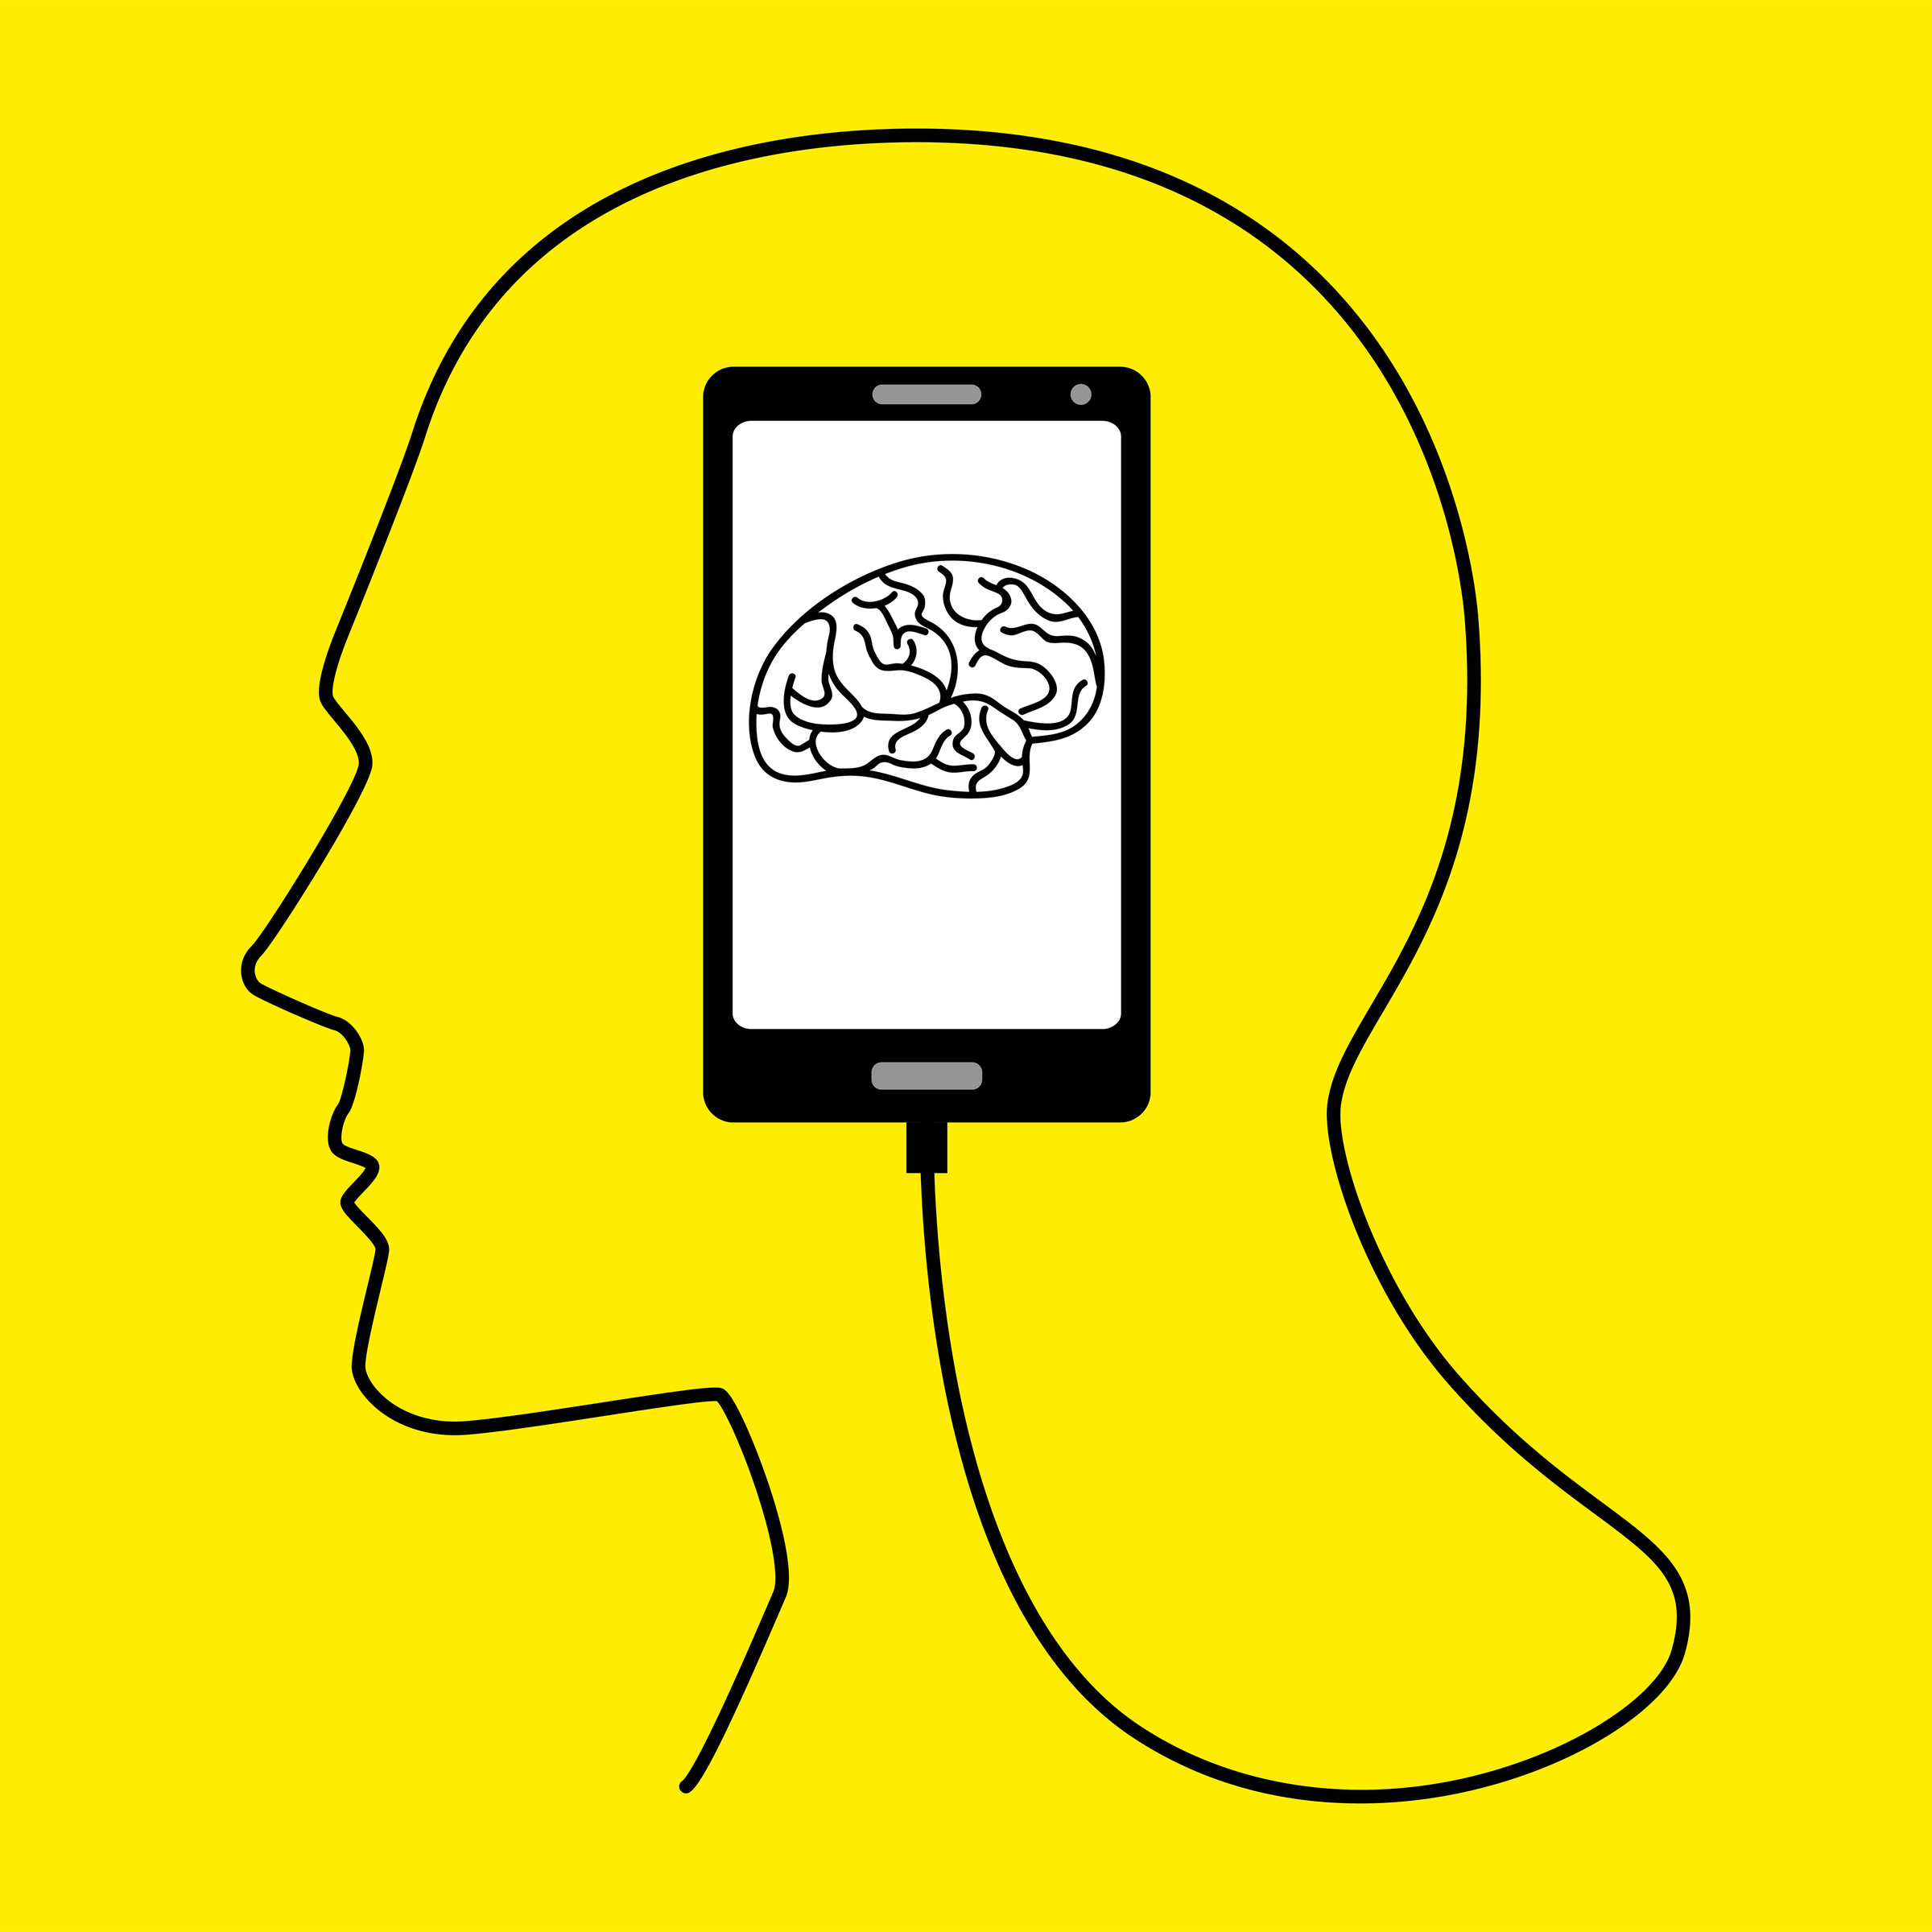 A phone with an image of a brain. A cord is plugged into the phone making the outline of a head on a yellow background. 